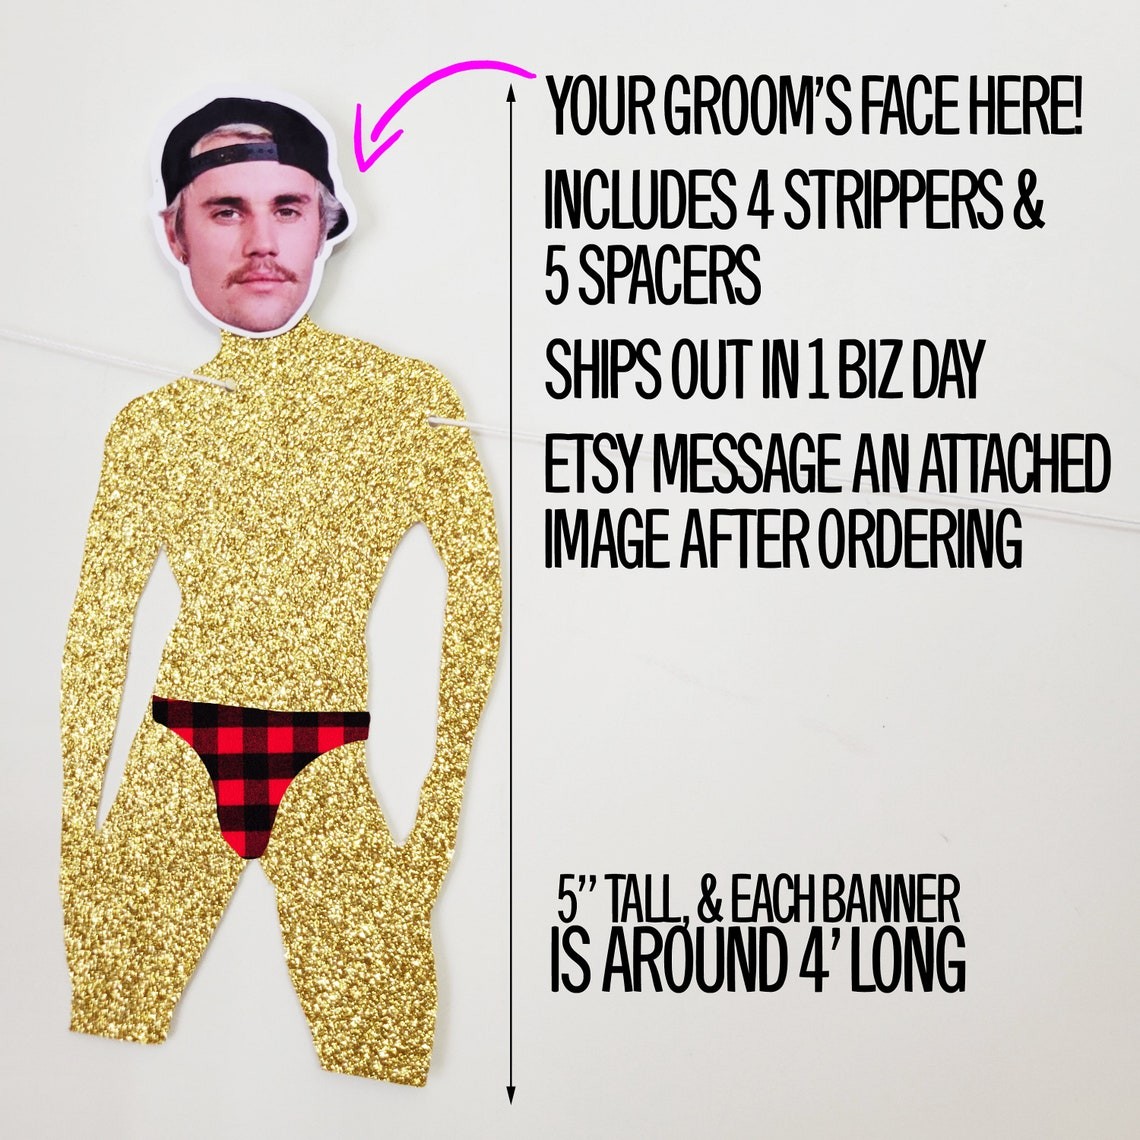 Groom Head Stripper Banner With Flannel Thong, Party Decorations